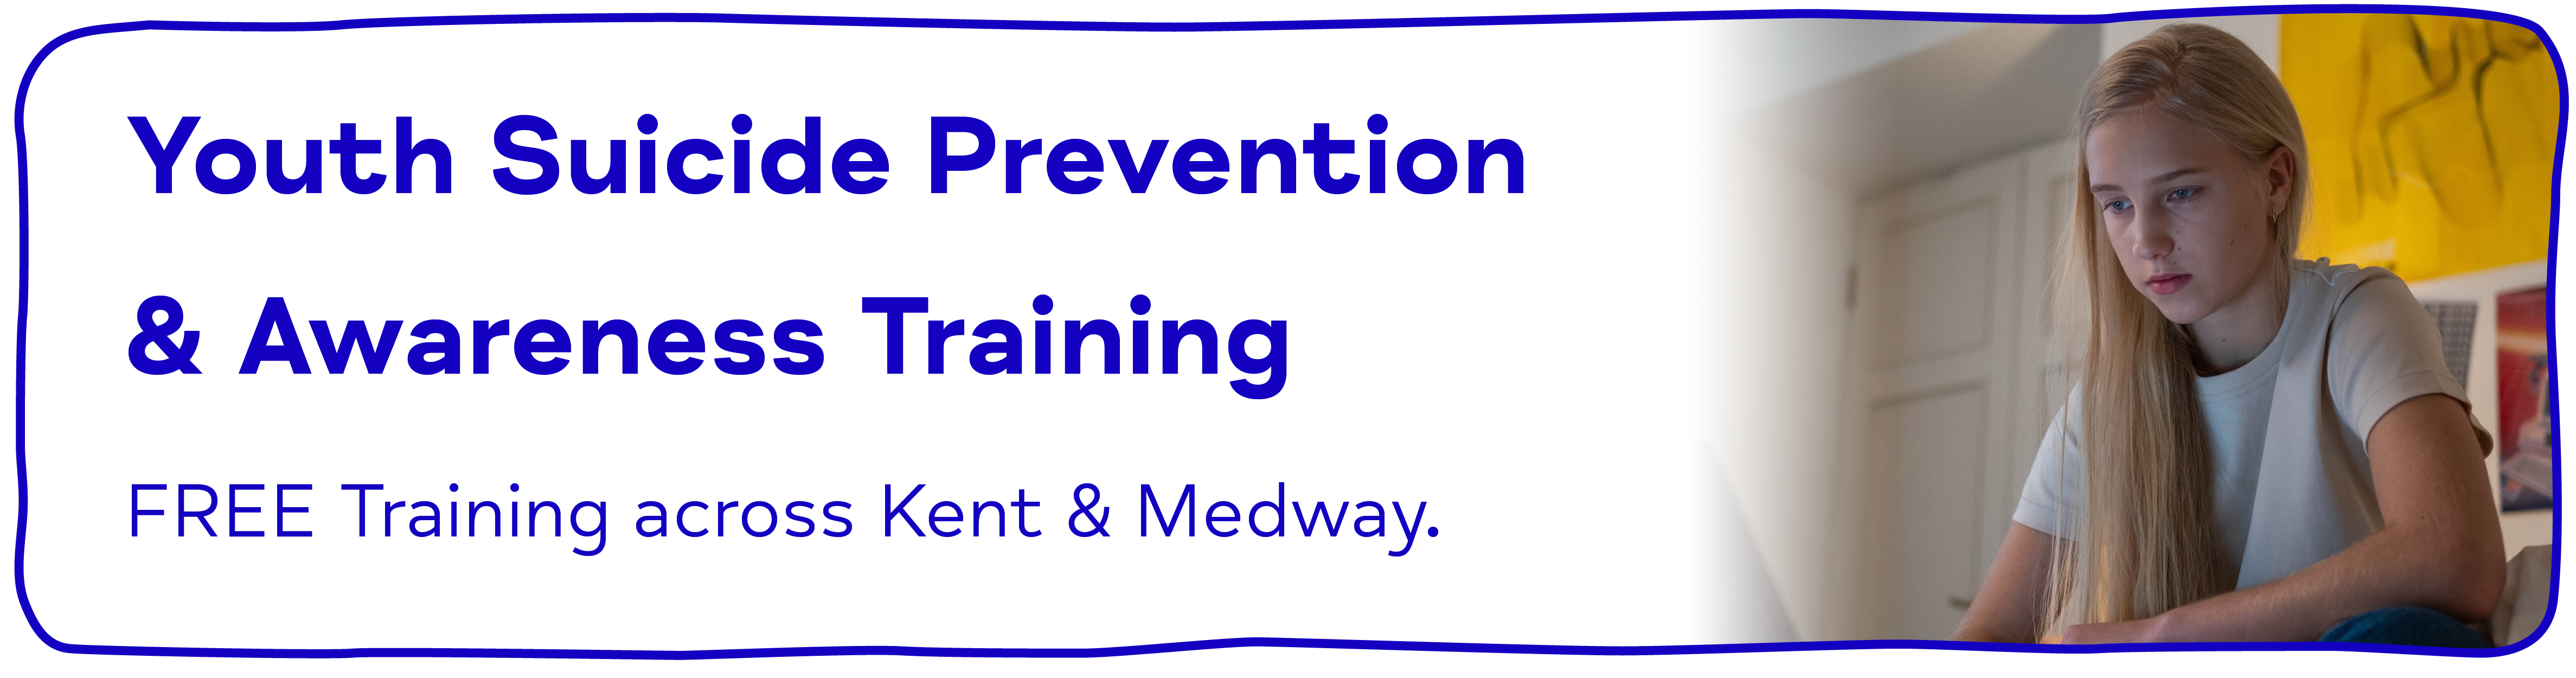 Youth Suicide Prevention & Awareness Training FREE Training across Kent & Medway.